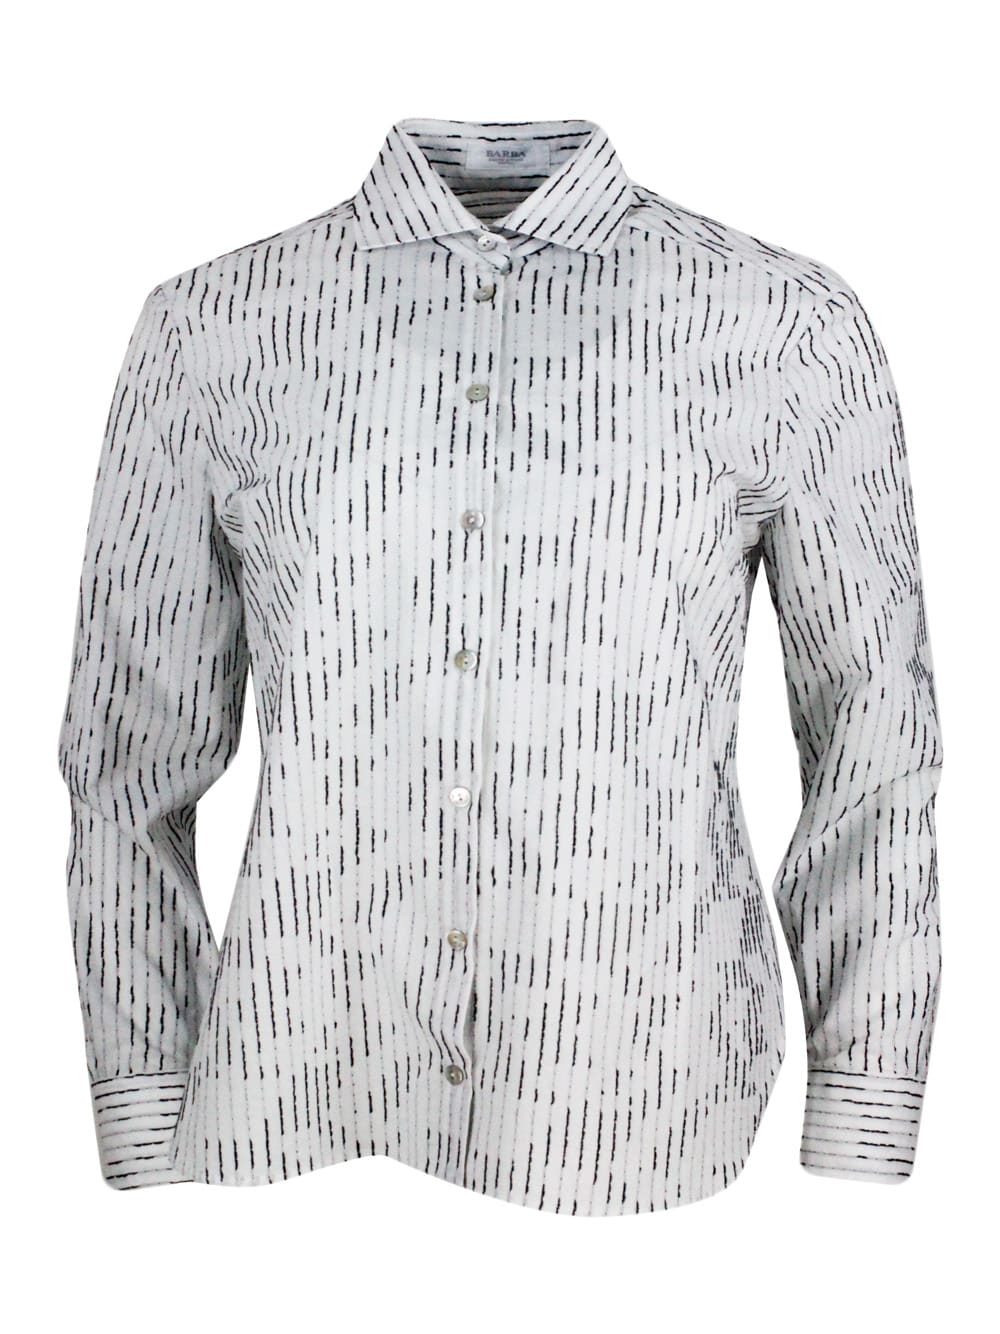 Long-sleeved Shirt In 100% Soft And Fine Cotton With Raised Vertical Threads. Regular Line